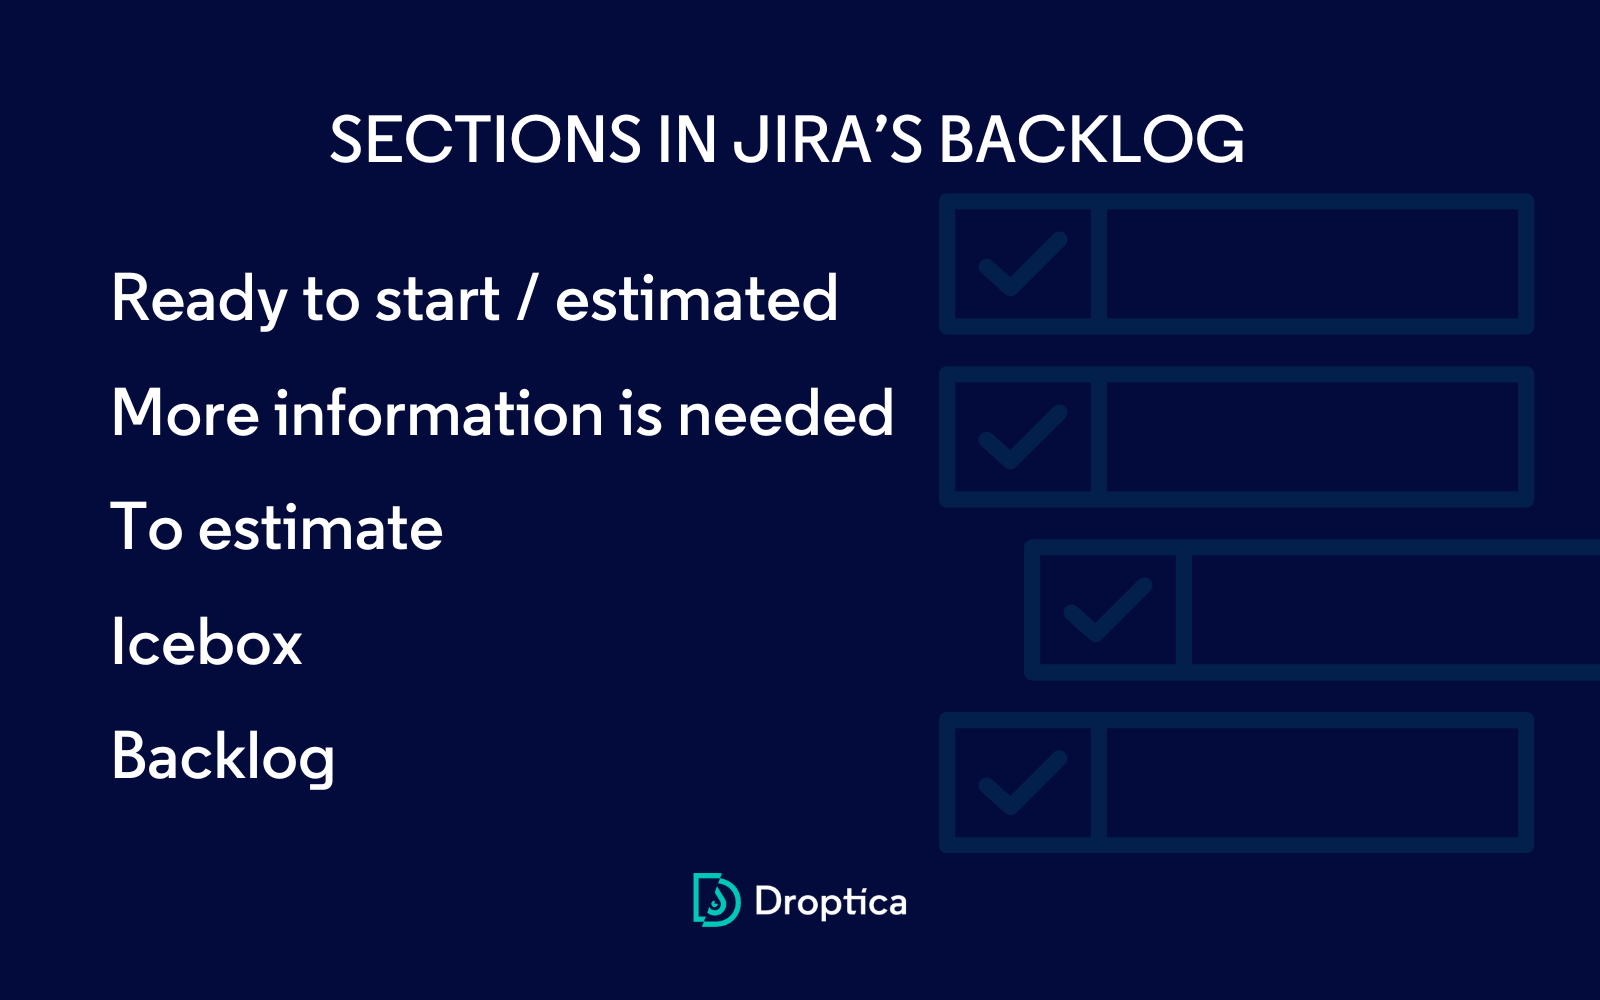 Sections in Jira’s backlog, a project management system, make it easier to plan tasks in sprints.